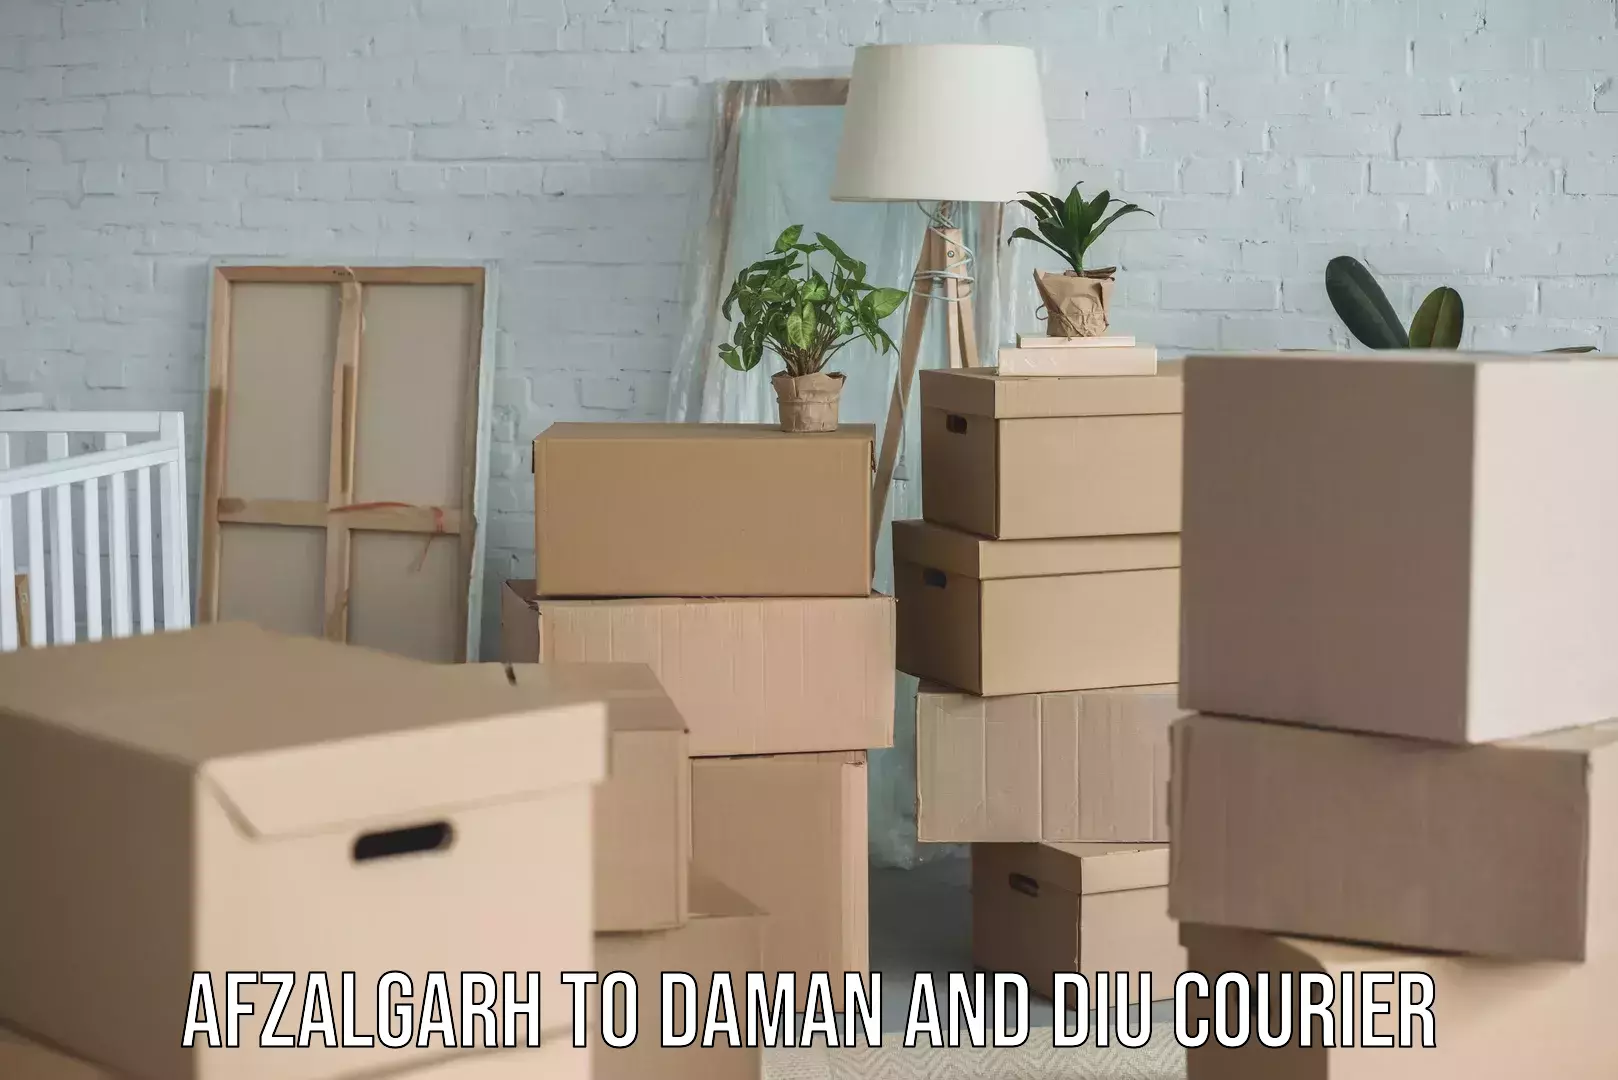 Courier rate comparison Afzalgarh to Daman and Diu